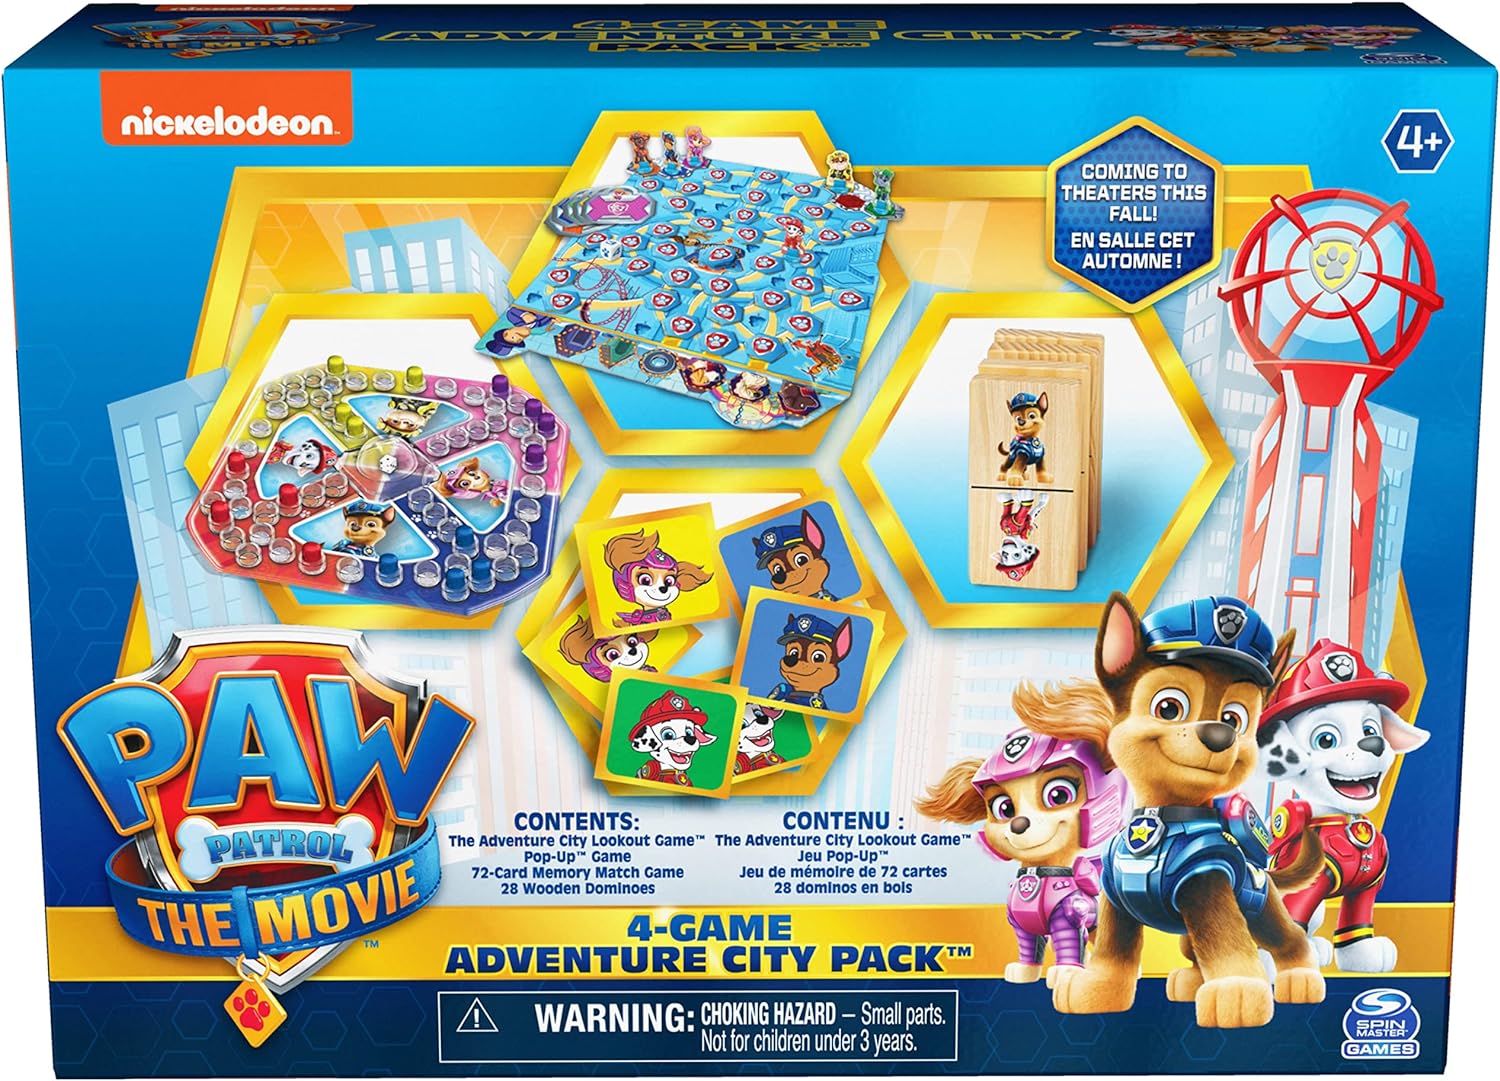 Board Game Spin Master Paw Patrol 4-Game Adventure City Pack – The